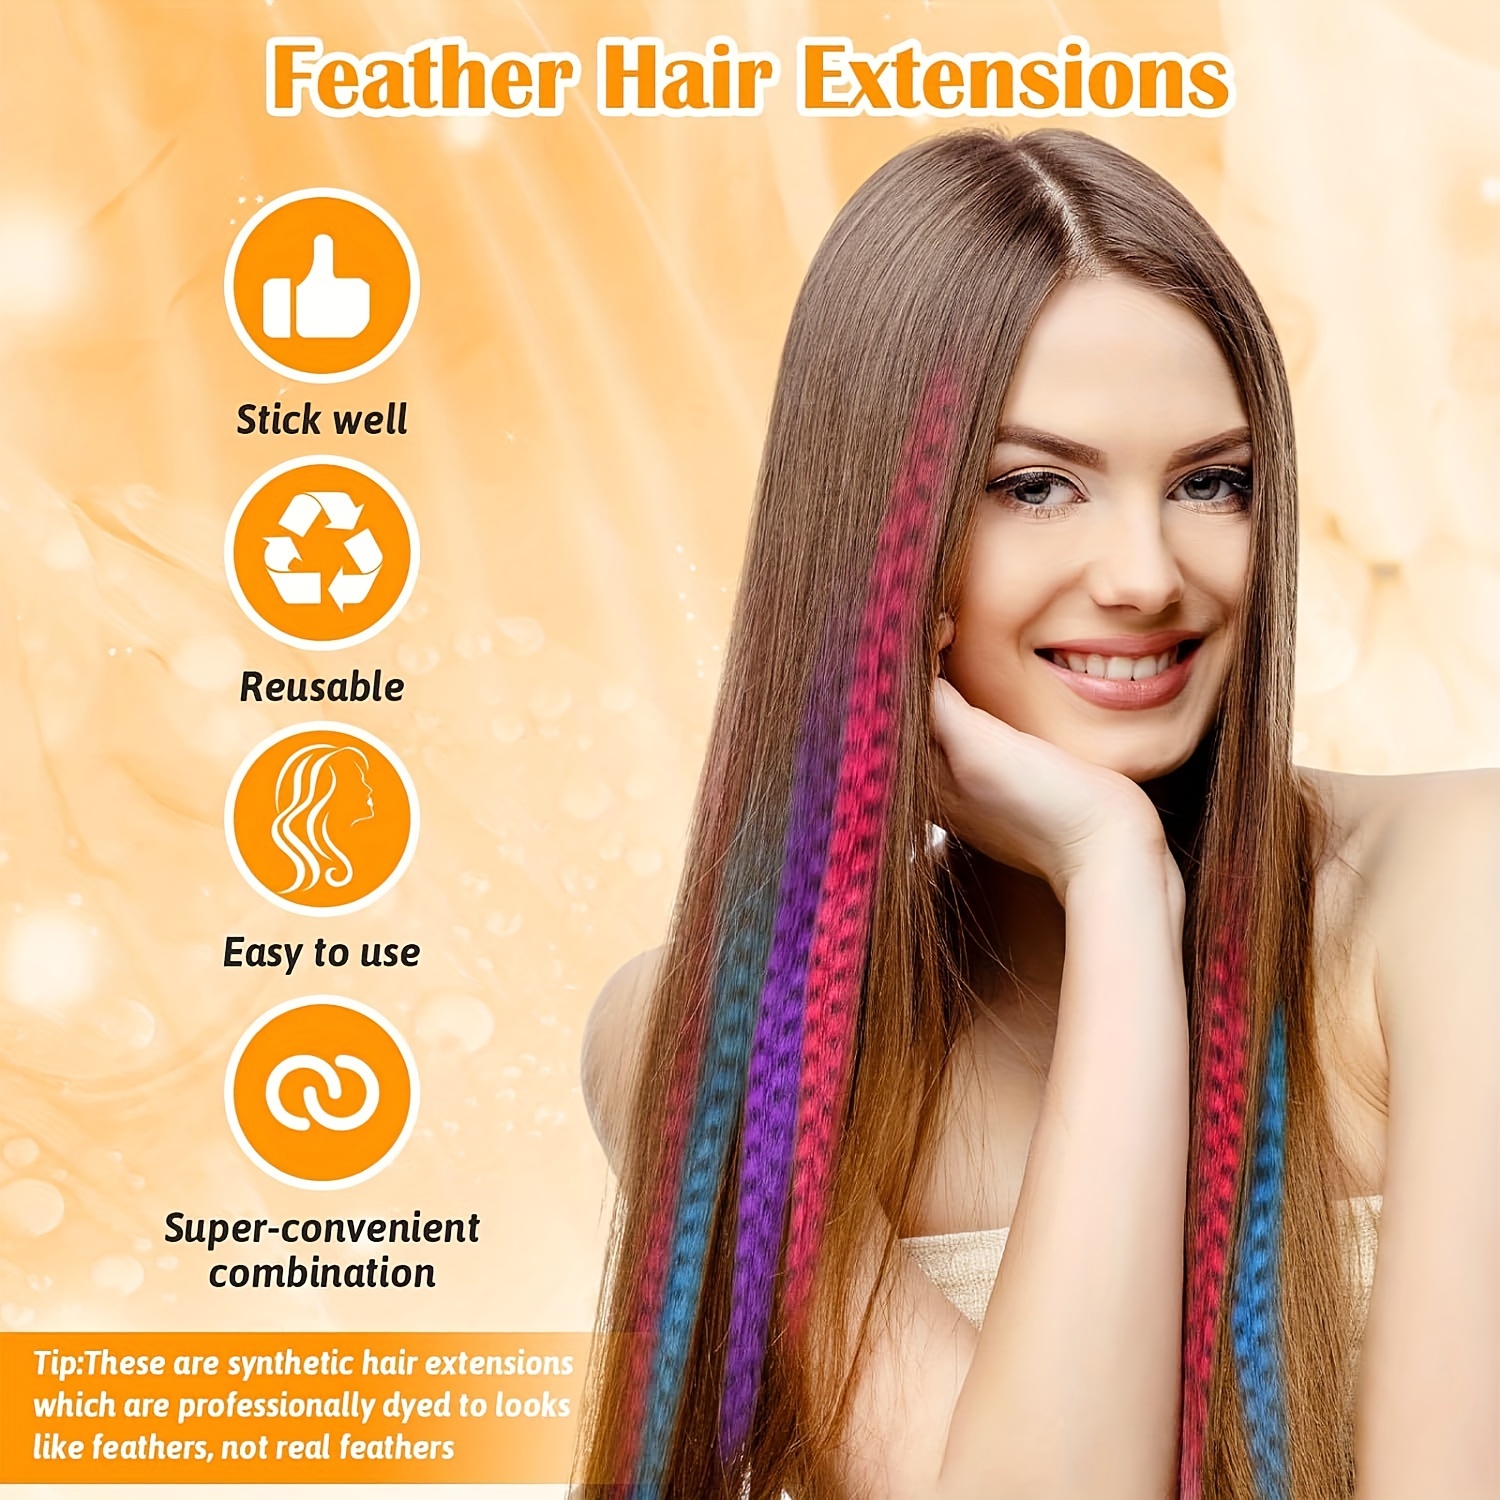 Feather Hair Extensions-Feather extensions-Hair Feathers